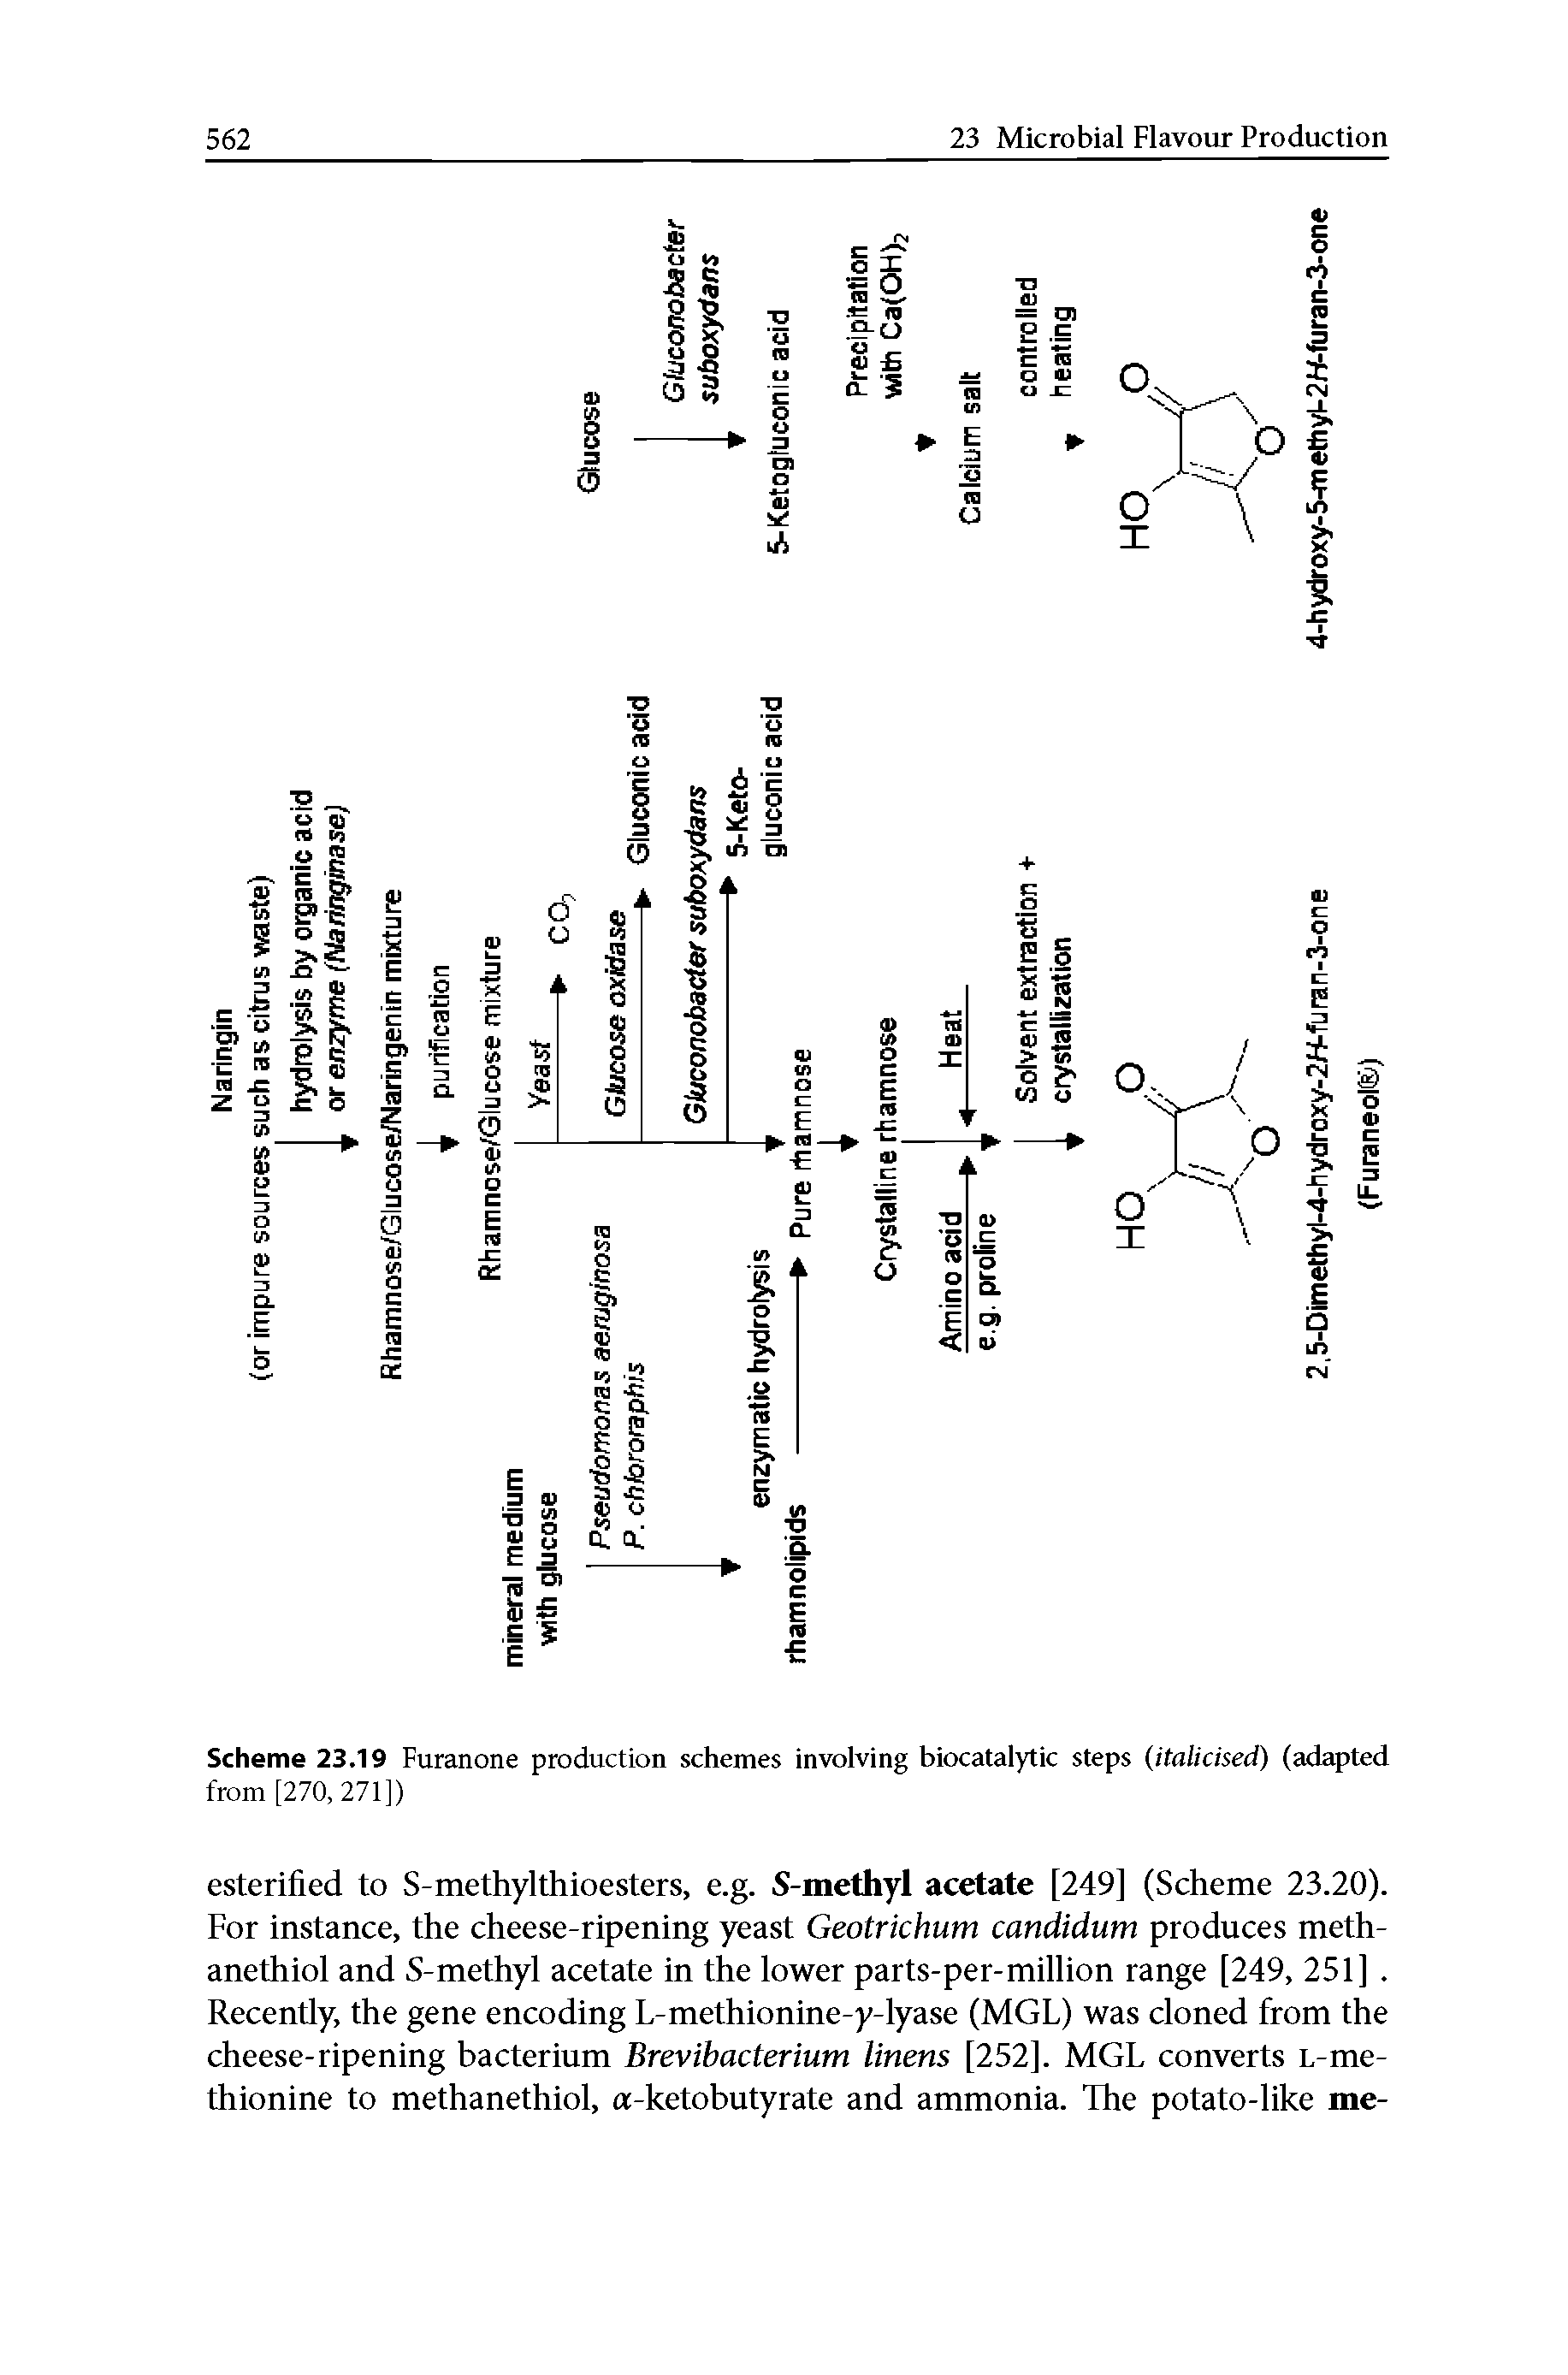 Scheme 23.19 Furanone production schemes involving biocatalytic steps (italicised) (adapted from [270,271])...